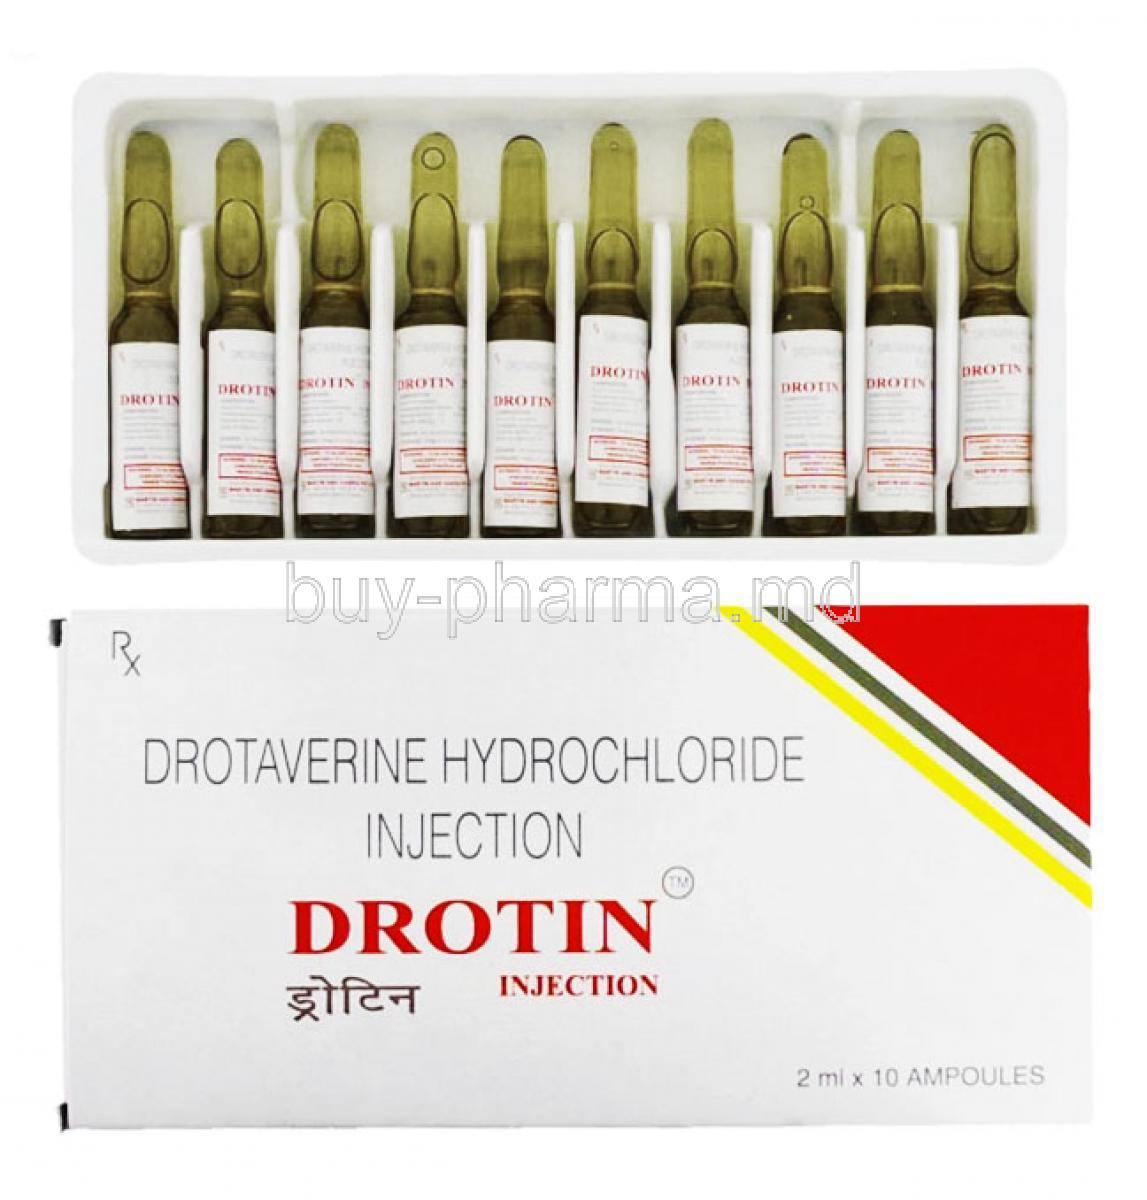 Drotin Injection, Drotaverine box and ampoules